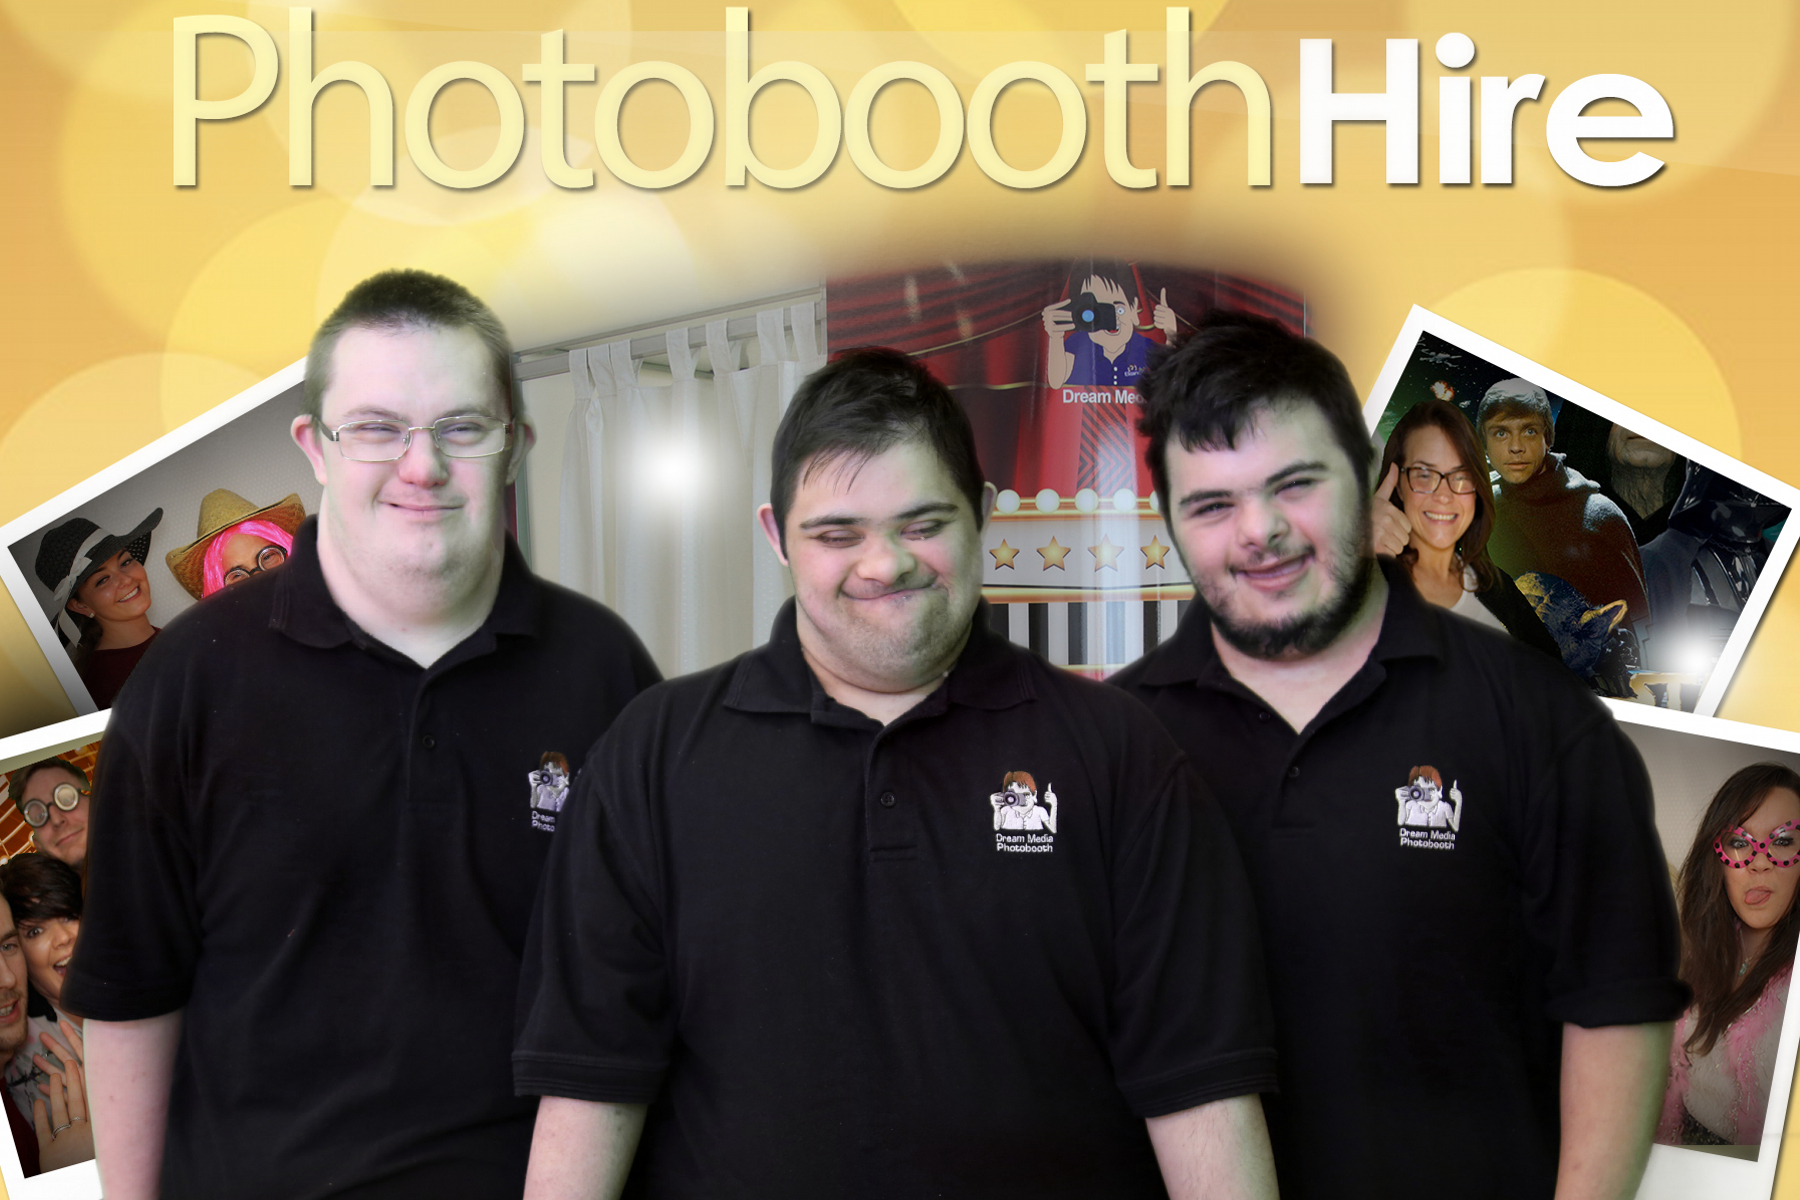 Custom Photobooth by Eleanor Healthcare Group at Smerdon Day Centre